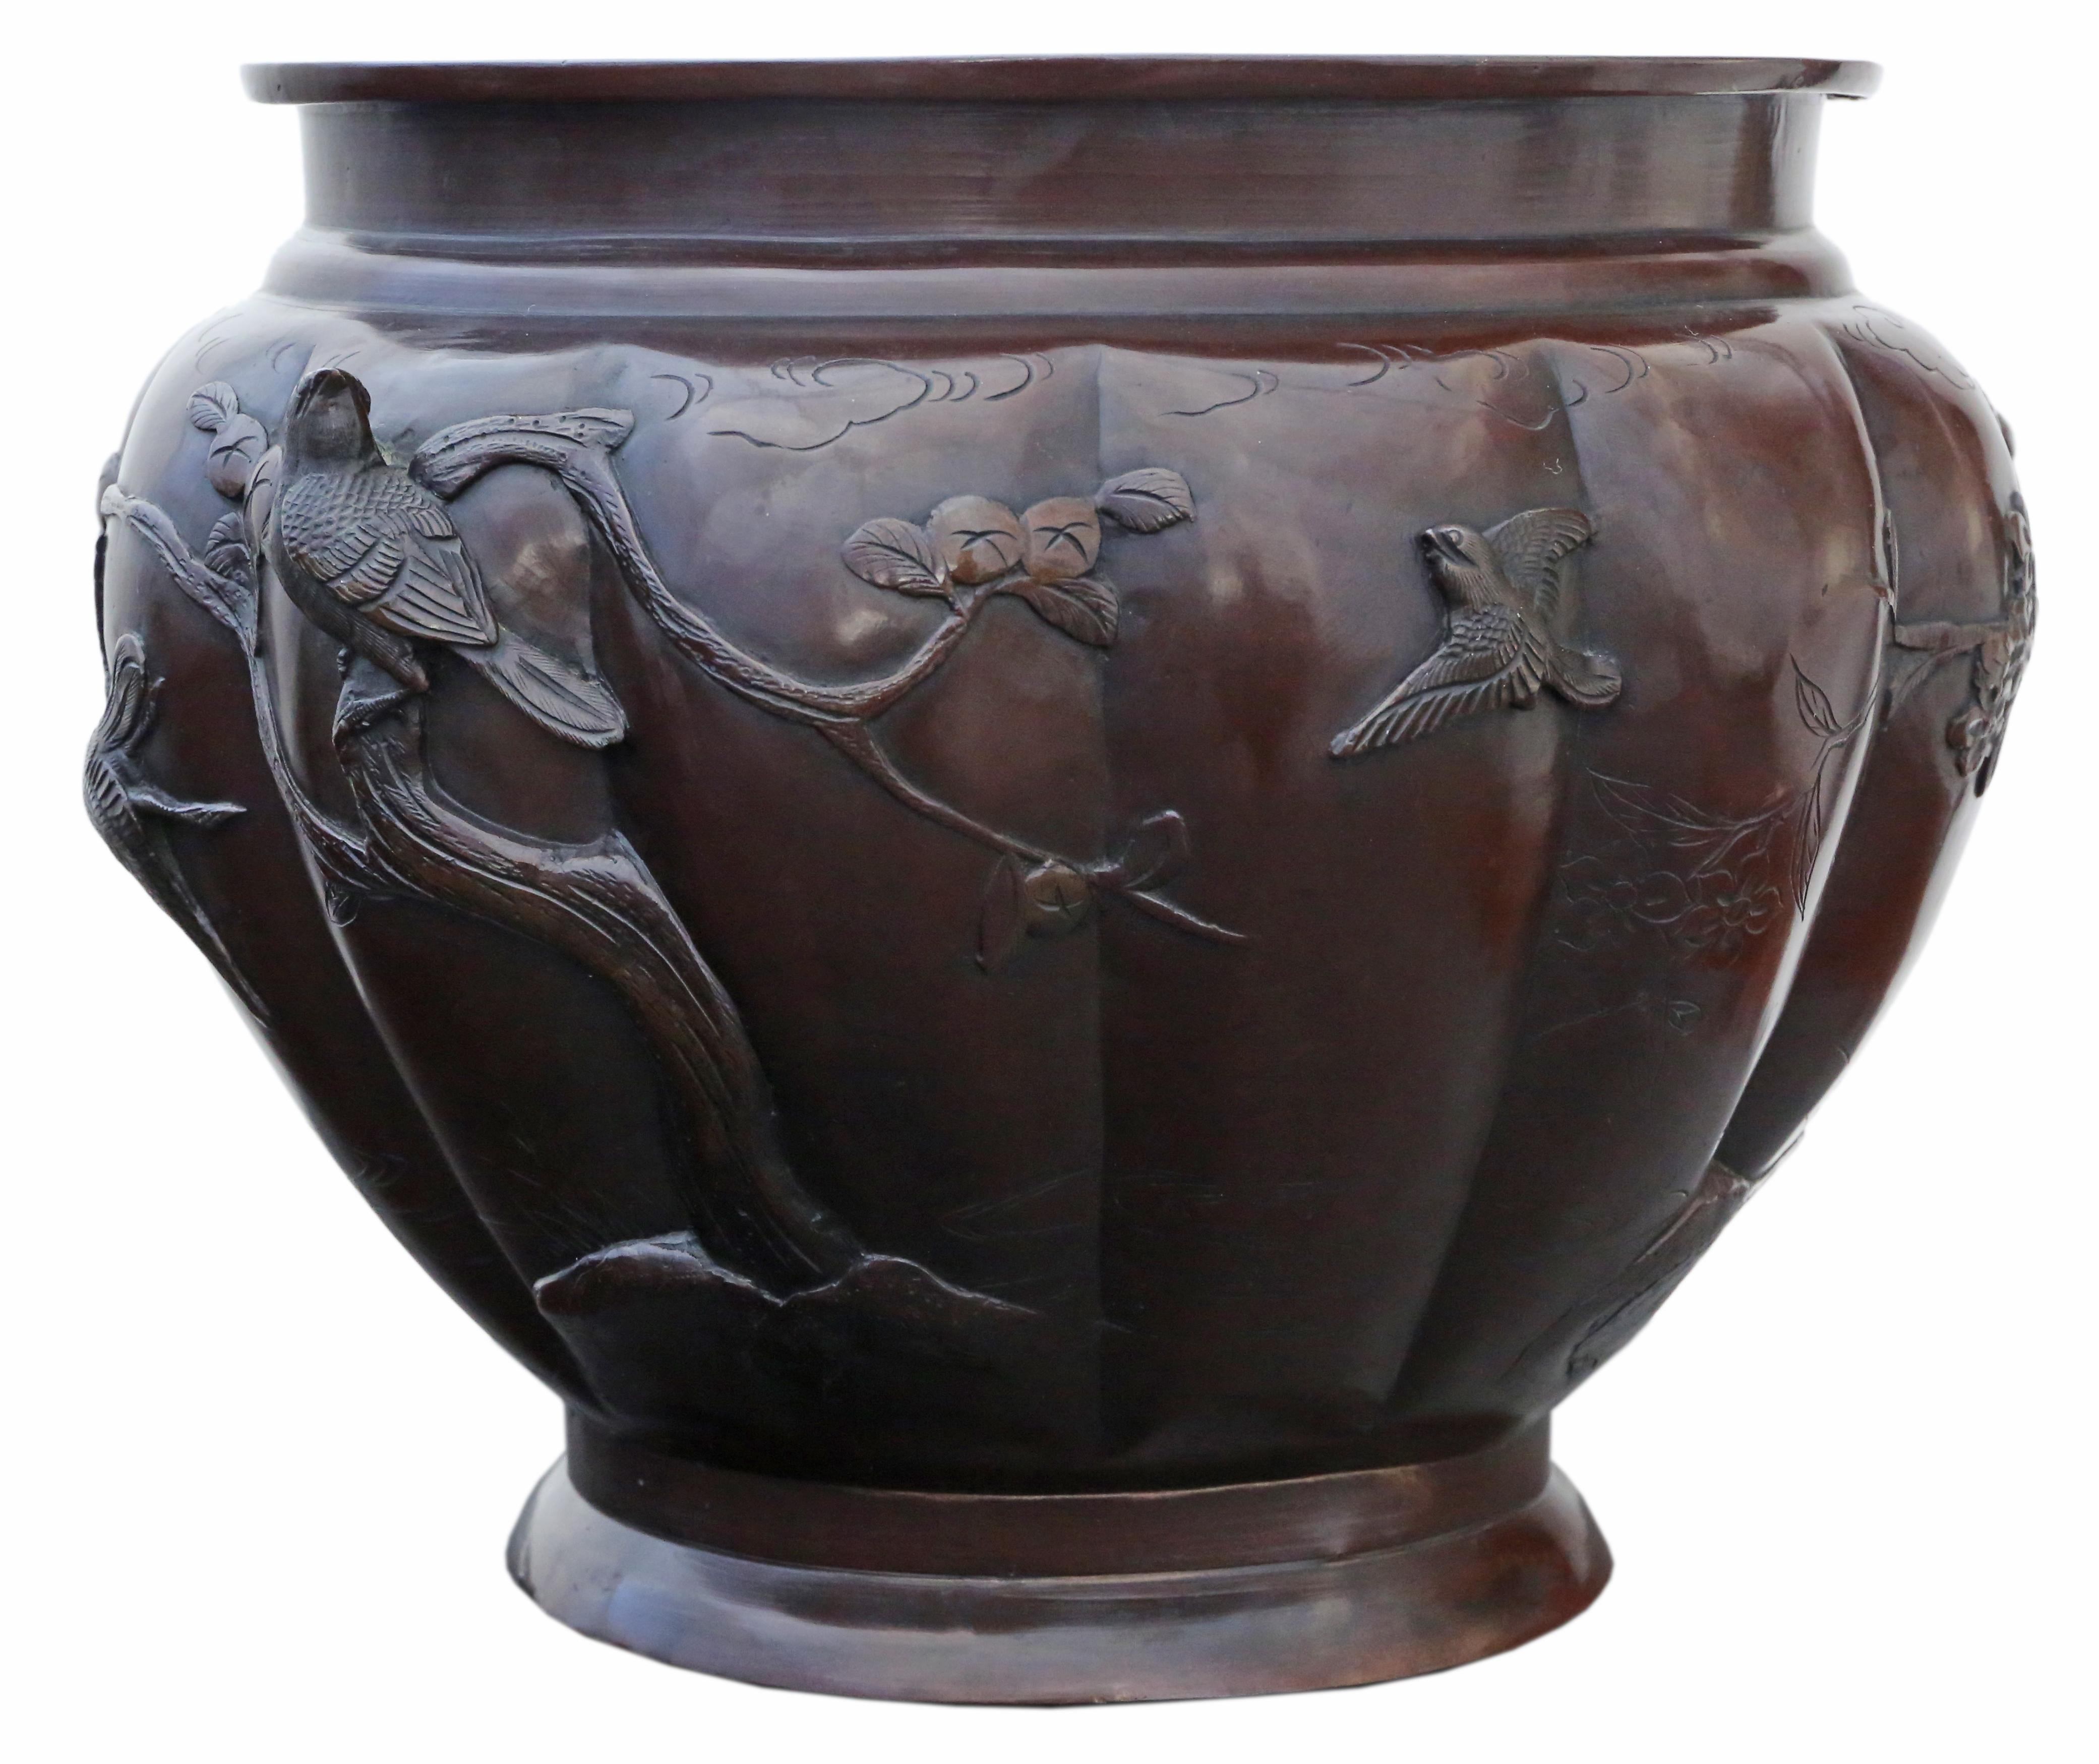 Antique Japanese Oriental Bronze Jardinière Planter Bowl Censor - Exquisite 19th Century Meiji Period Piece!

This stunning bronze jardinière planter bowl, originating from the 19th century Meiji Period, is a testament to Japanese artistry and